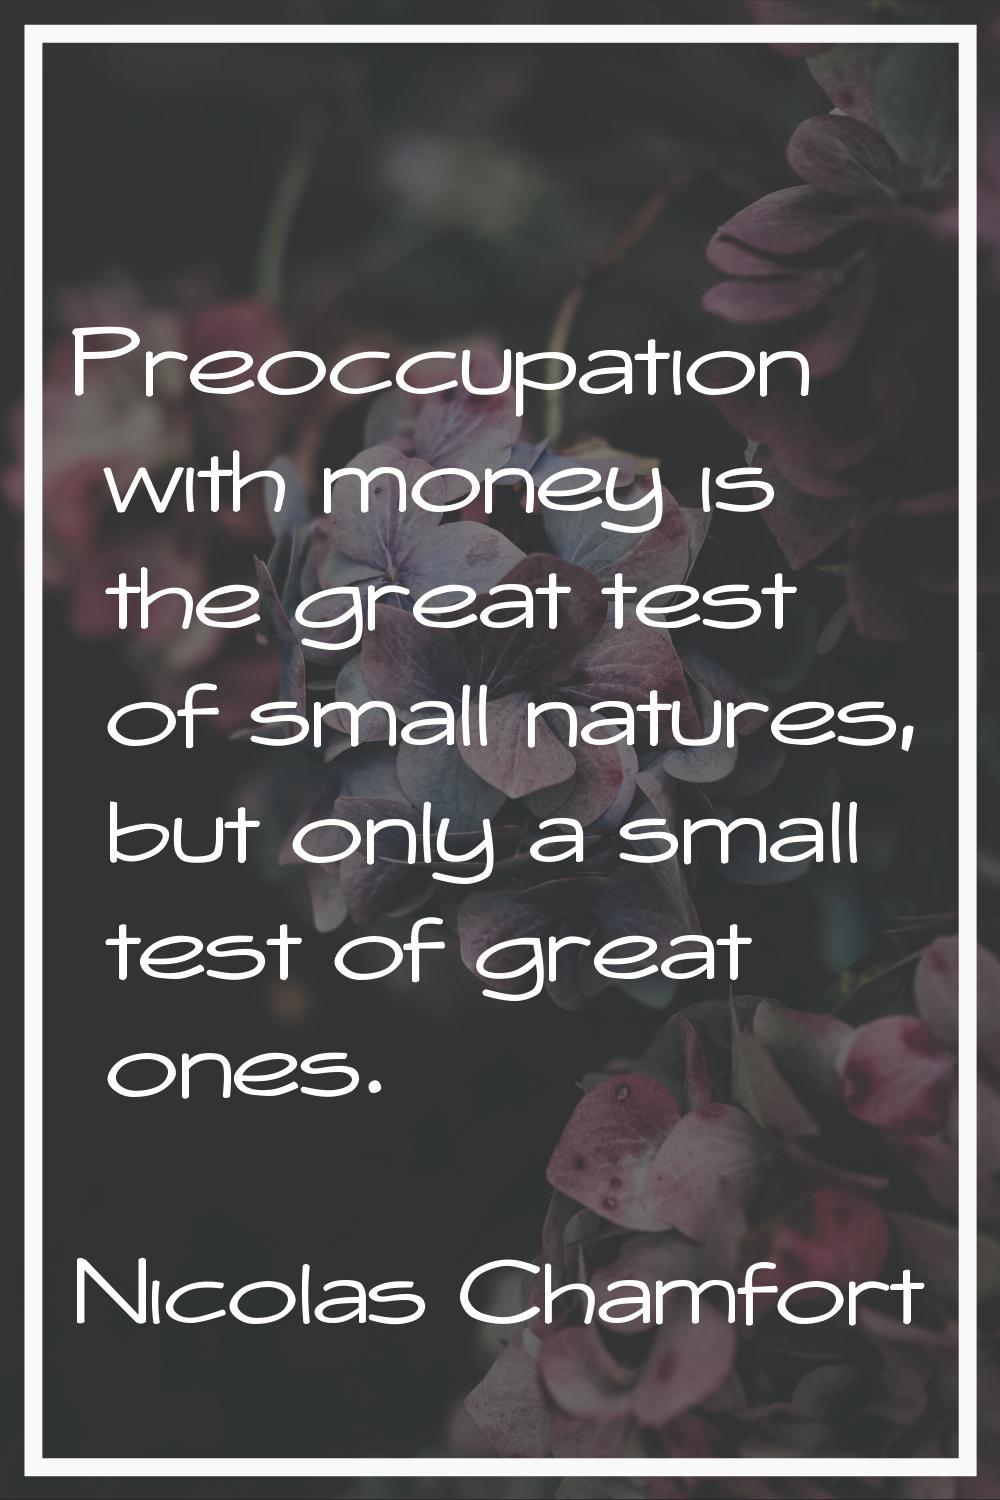 Preoccupation with money is the great test of small natures, but only a small test of great ones.